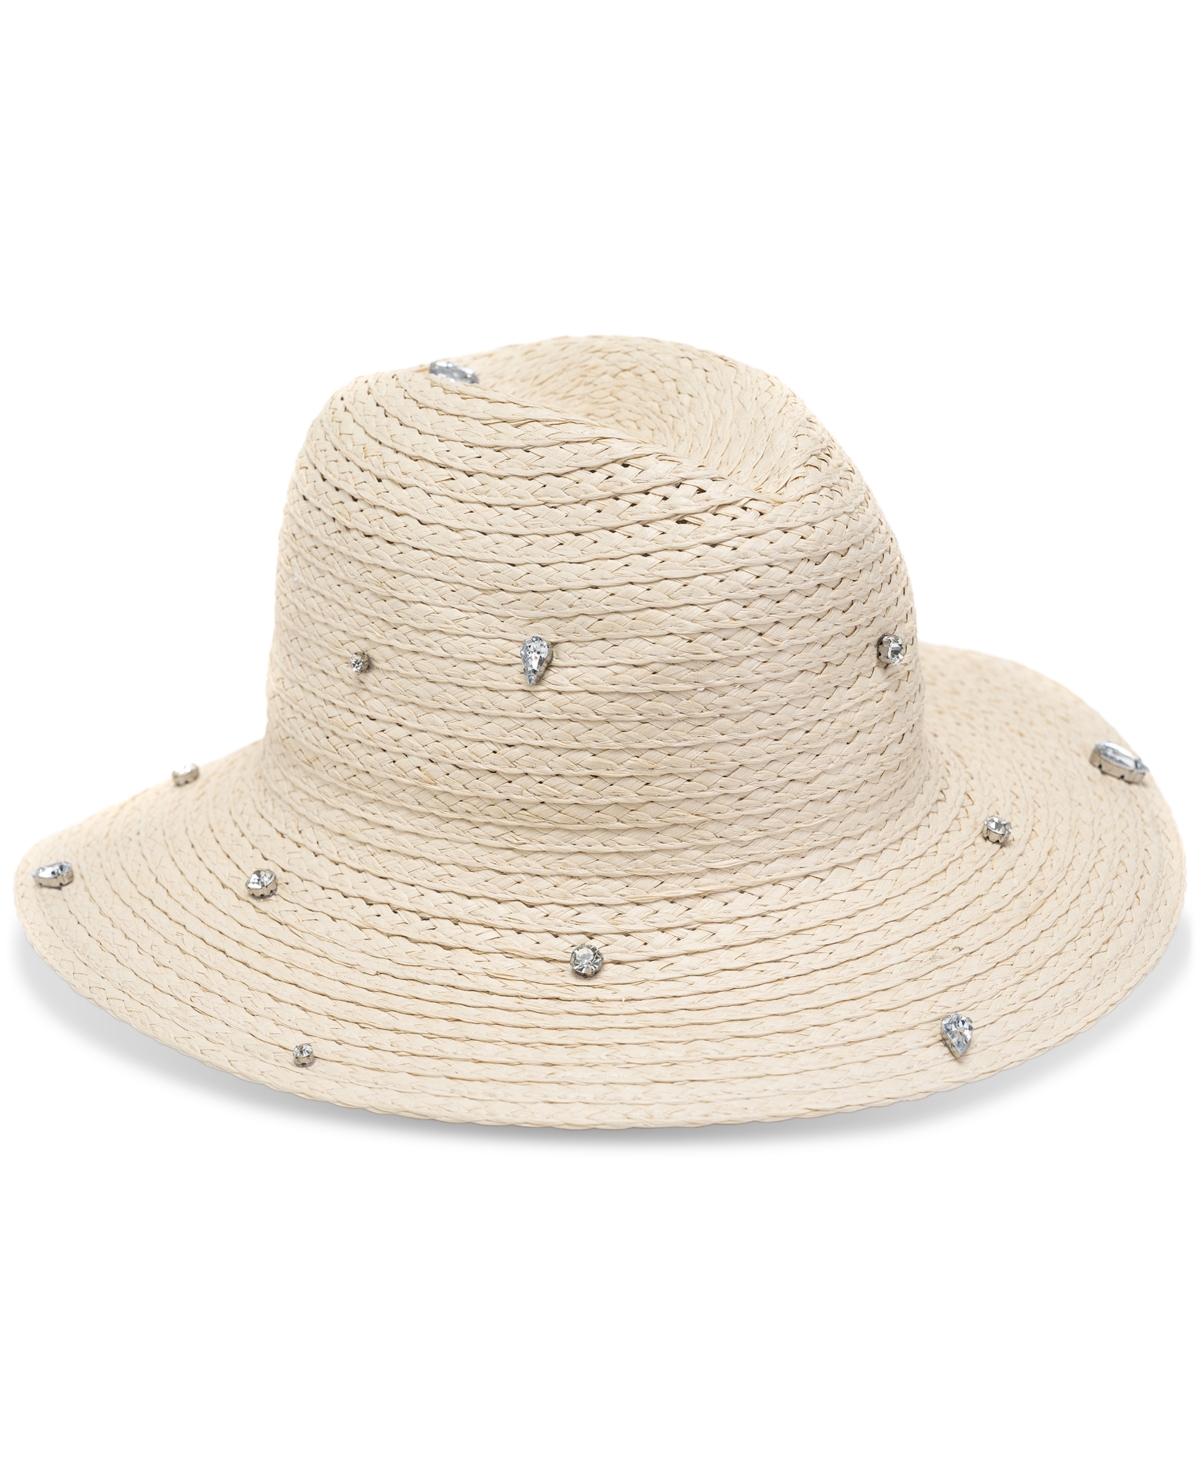 Women's Embellished Panama Hat, Created for Macy's - Natural